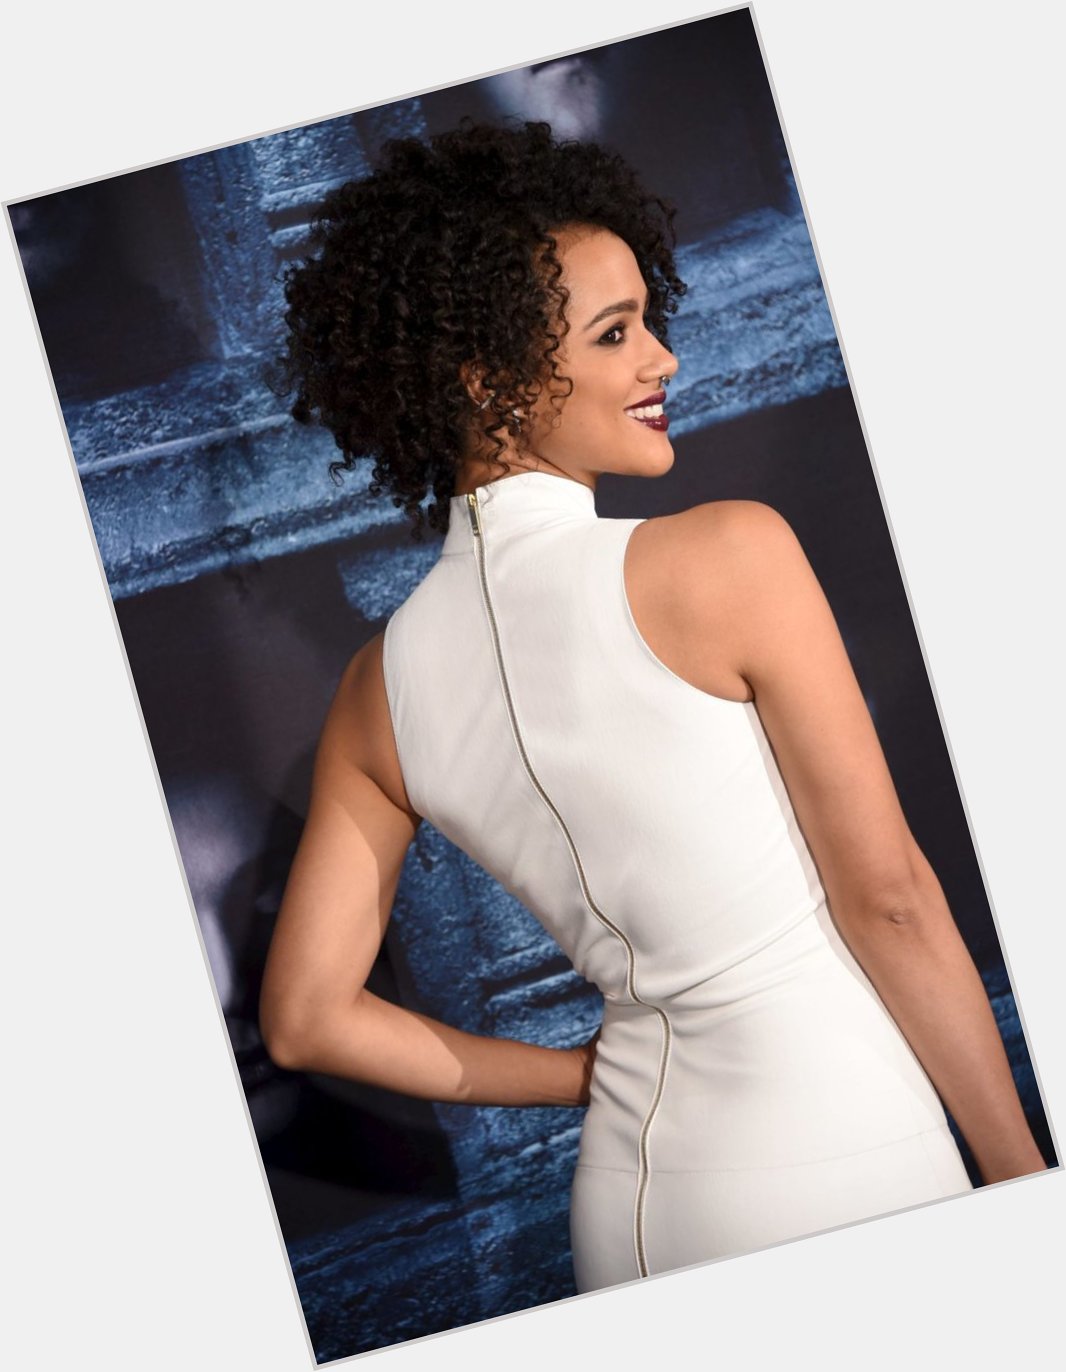 Happy Birthday to Nathalie Emmanuel    Who is 32yo today! 